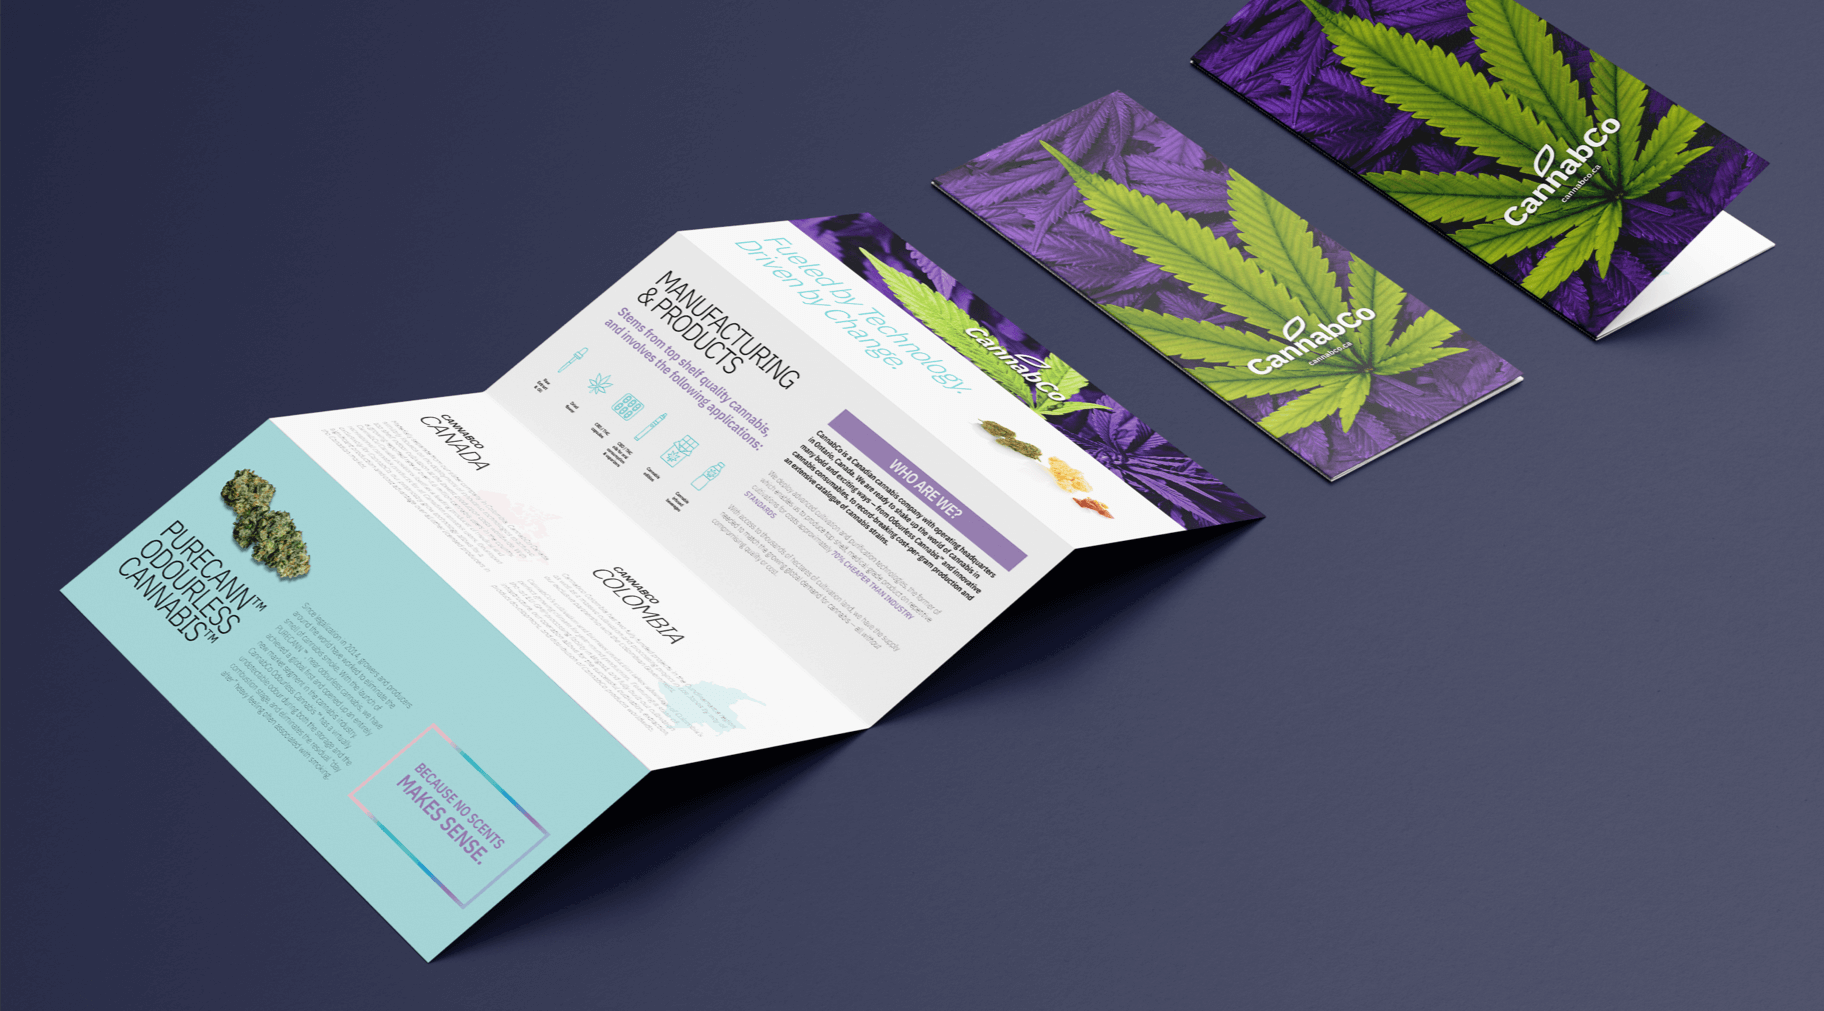 Promotional collateral that Elite Digital created for Cannabco.